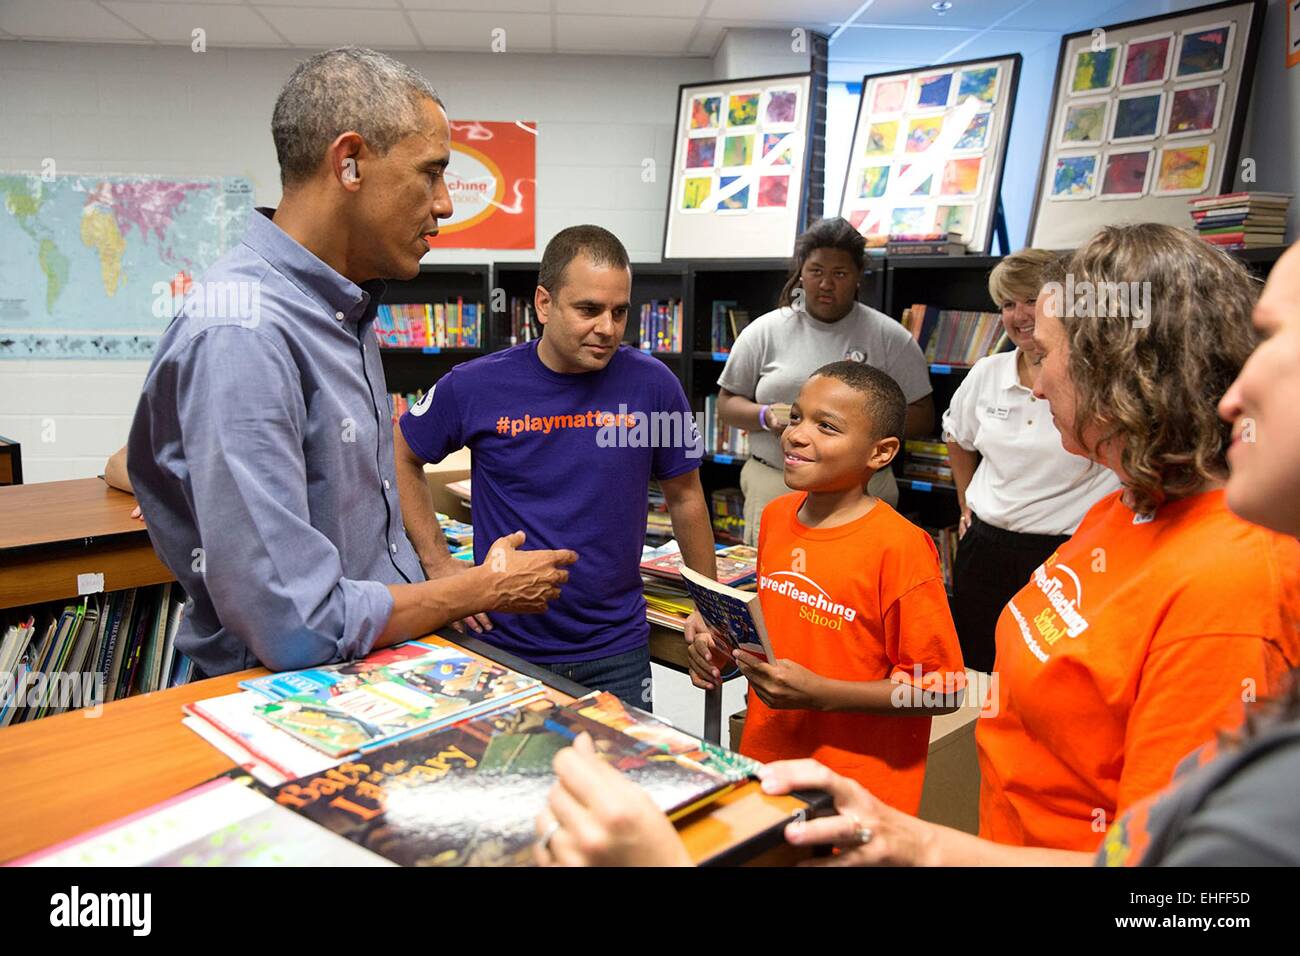 US President Barack Obama speaks with volunteers working in the school library during a National Day of Service and Remembrance project at the Inspired Teaching Demonstration Public Charter School September 11, 2014 in Washington, D.C. Stock Photo